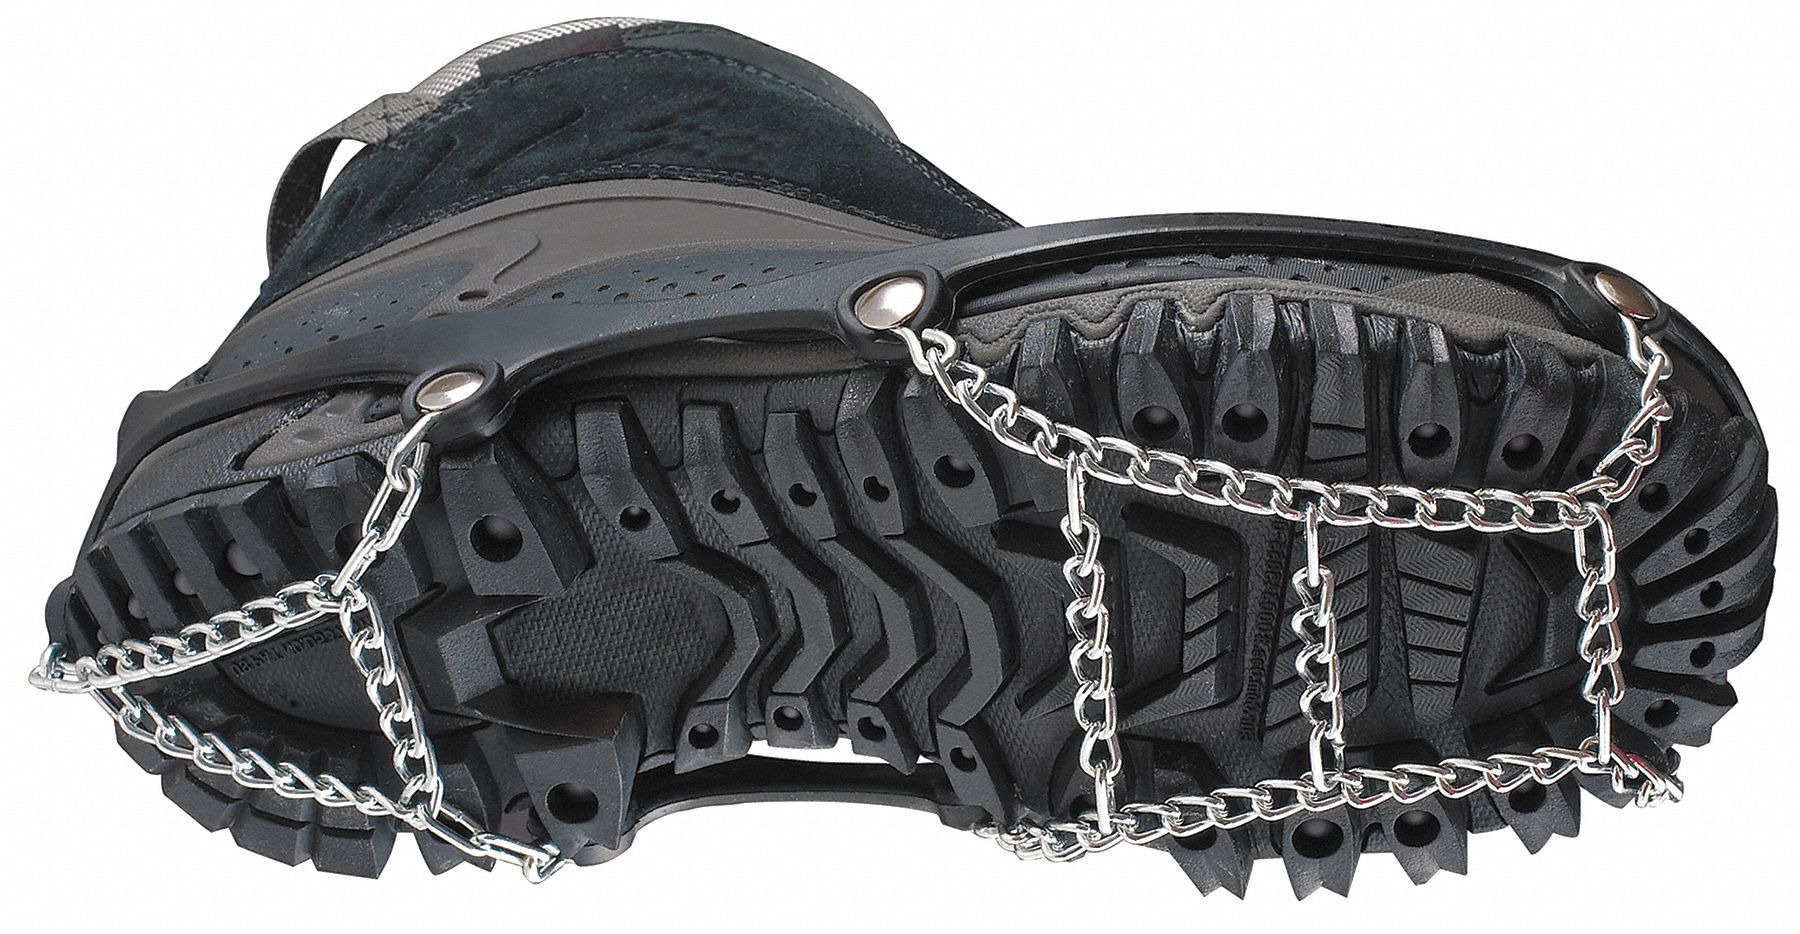 Traction Device: Ball/Heel/Mid-Sole Footwear Coverage, Rubber, Chain, 5 to 6 Fits Shoe Size, 1 PR